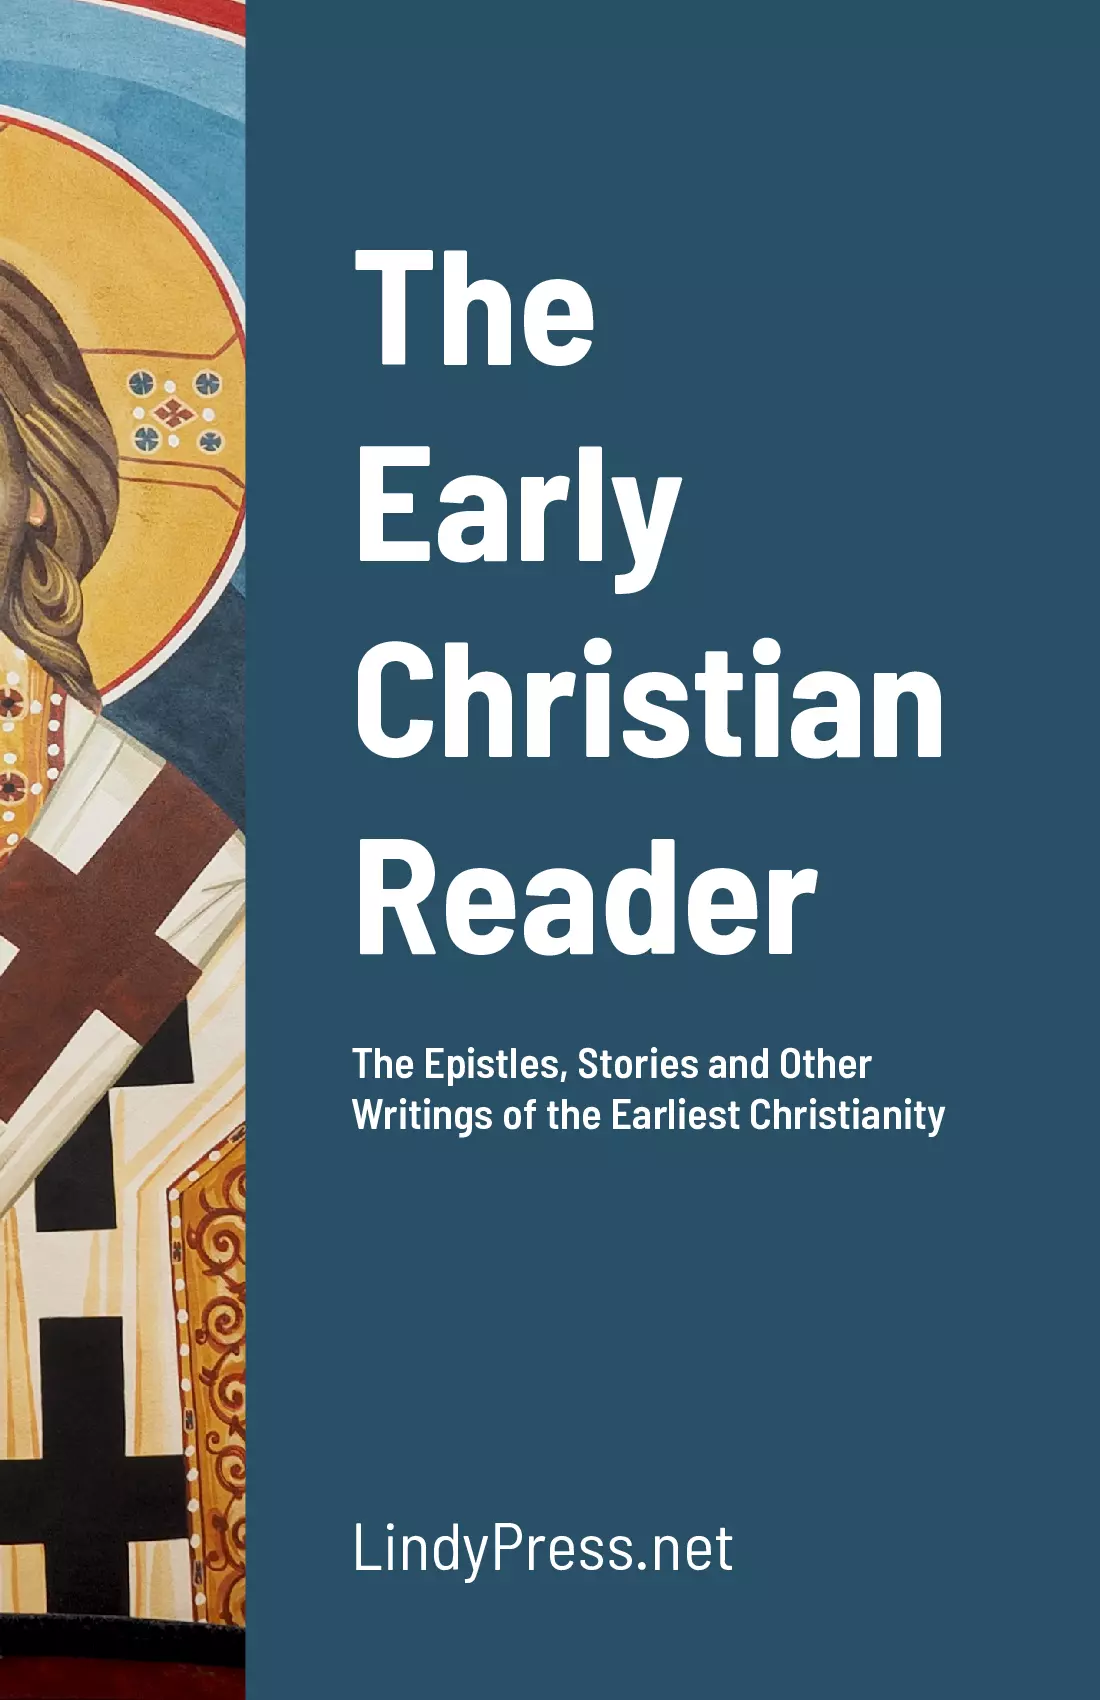 The Early Christian Reader